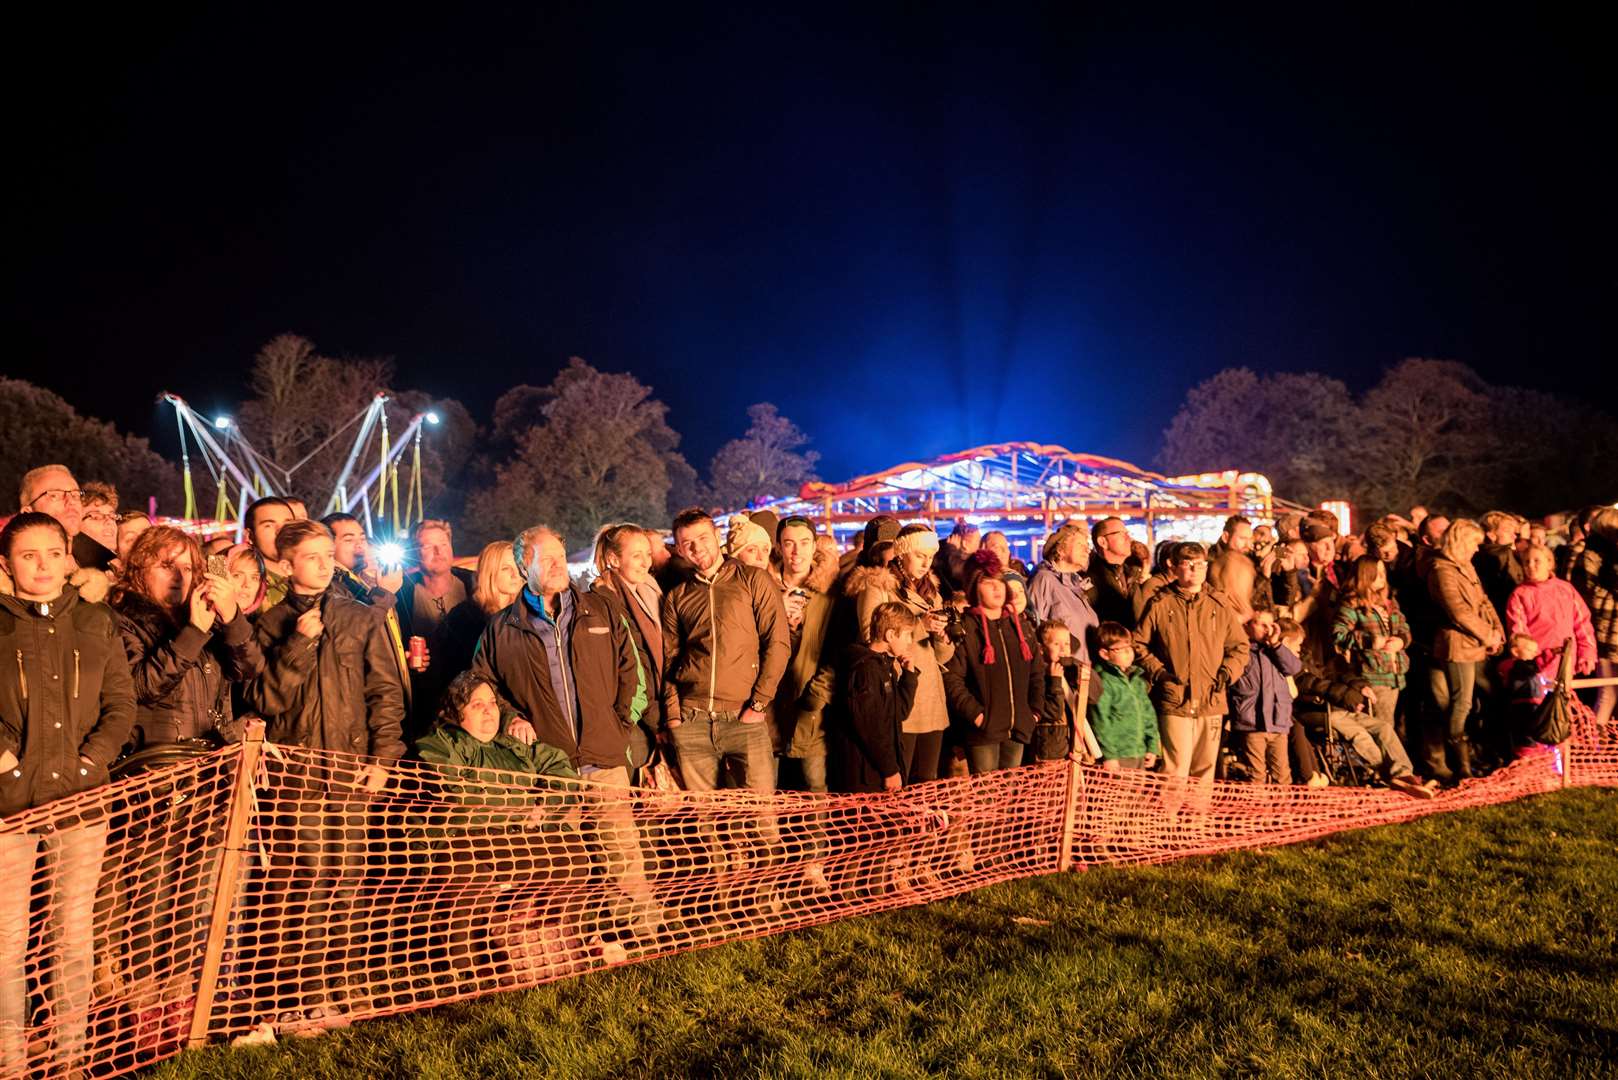 Quex Park fireworks is a popular annual event that has been running for over 15 years. Picture: Julie Blackmer